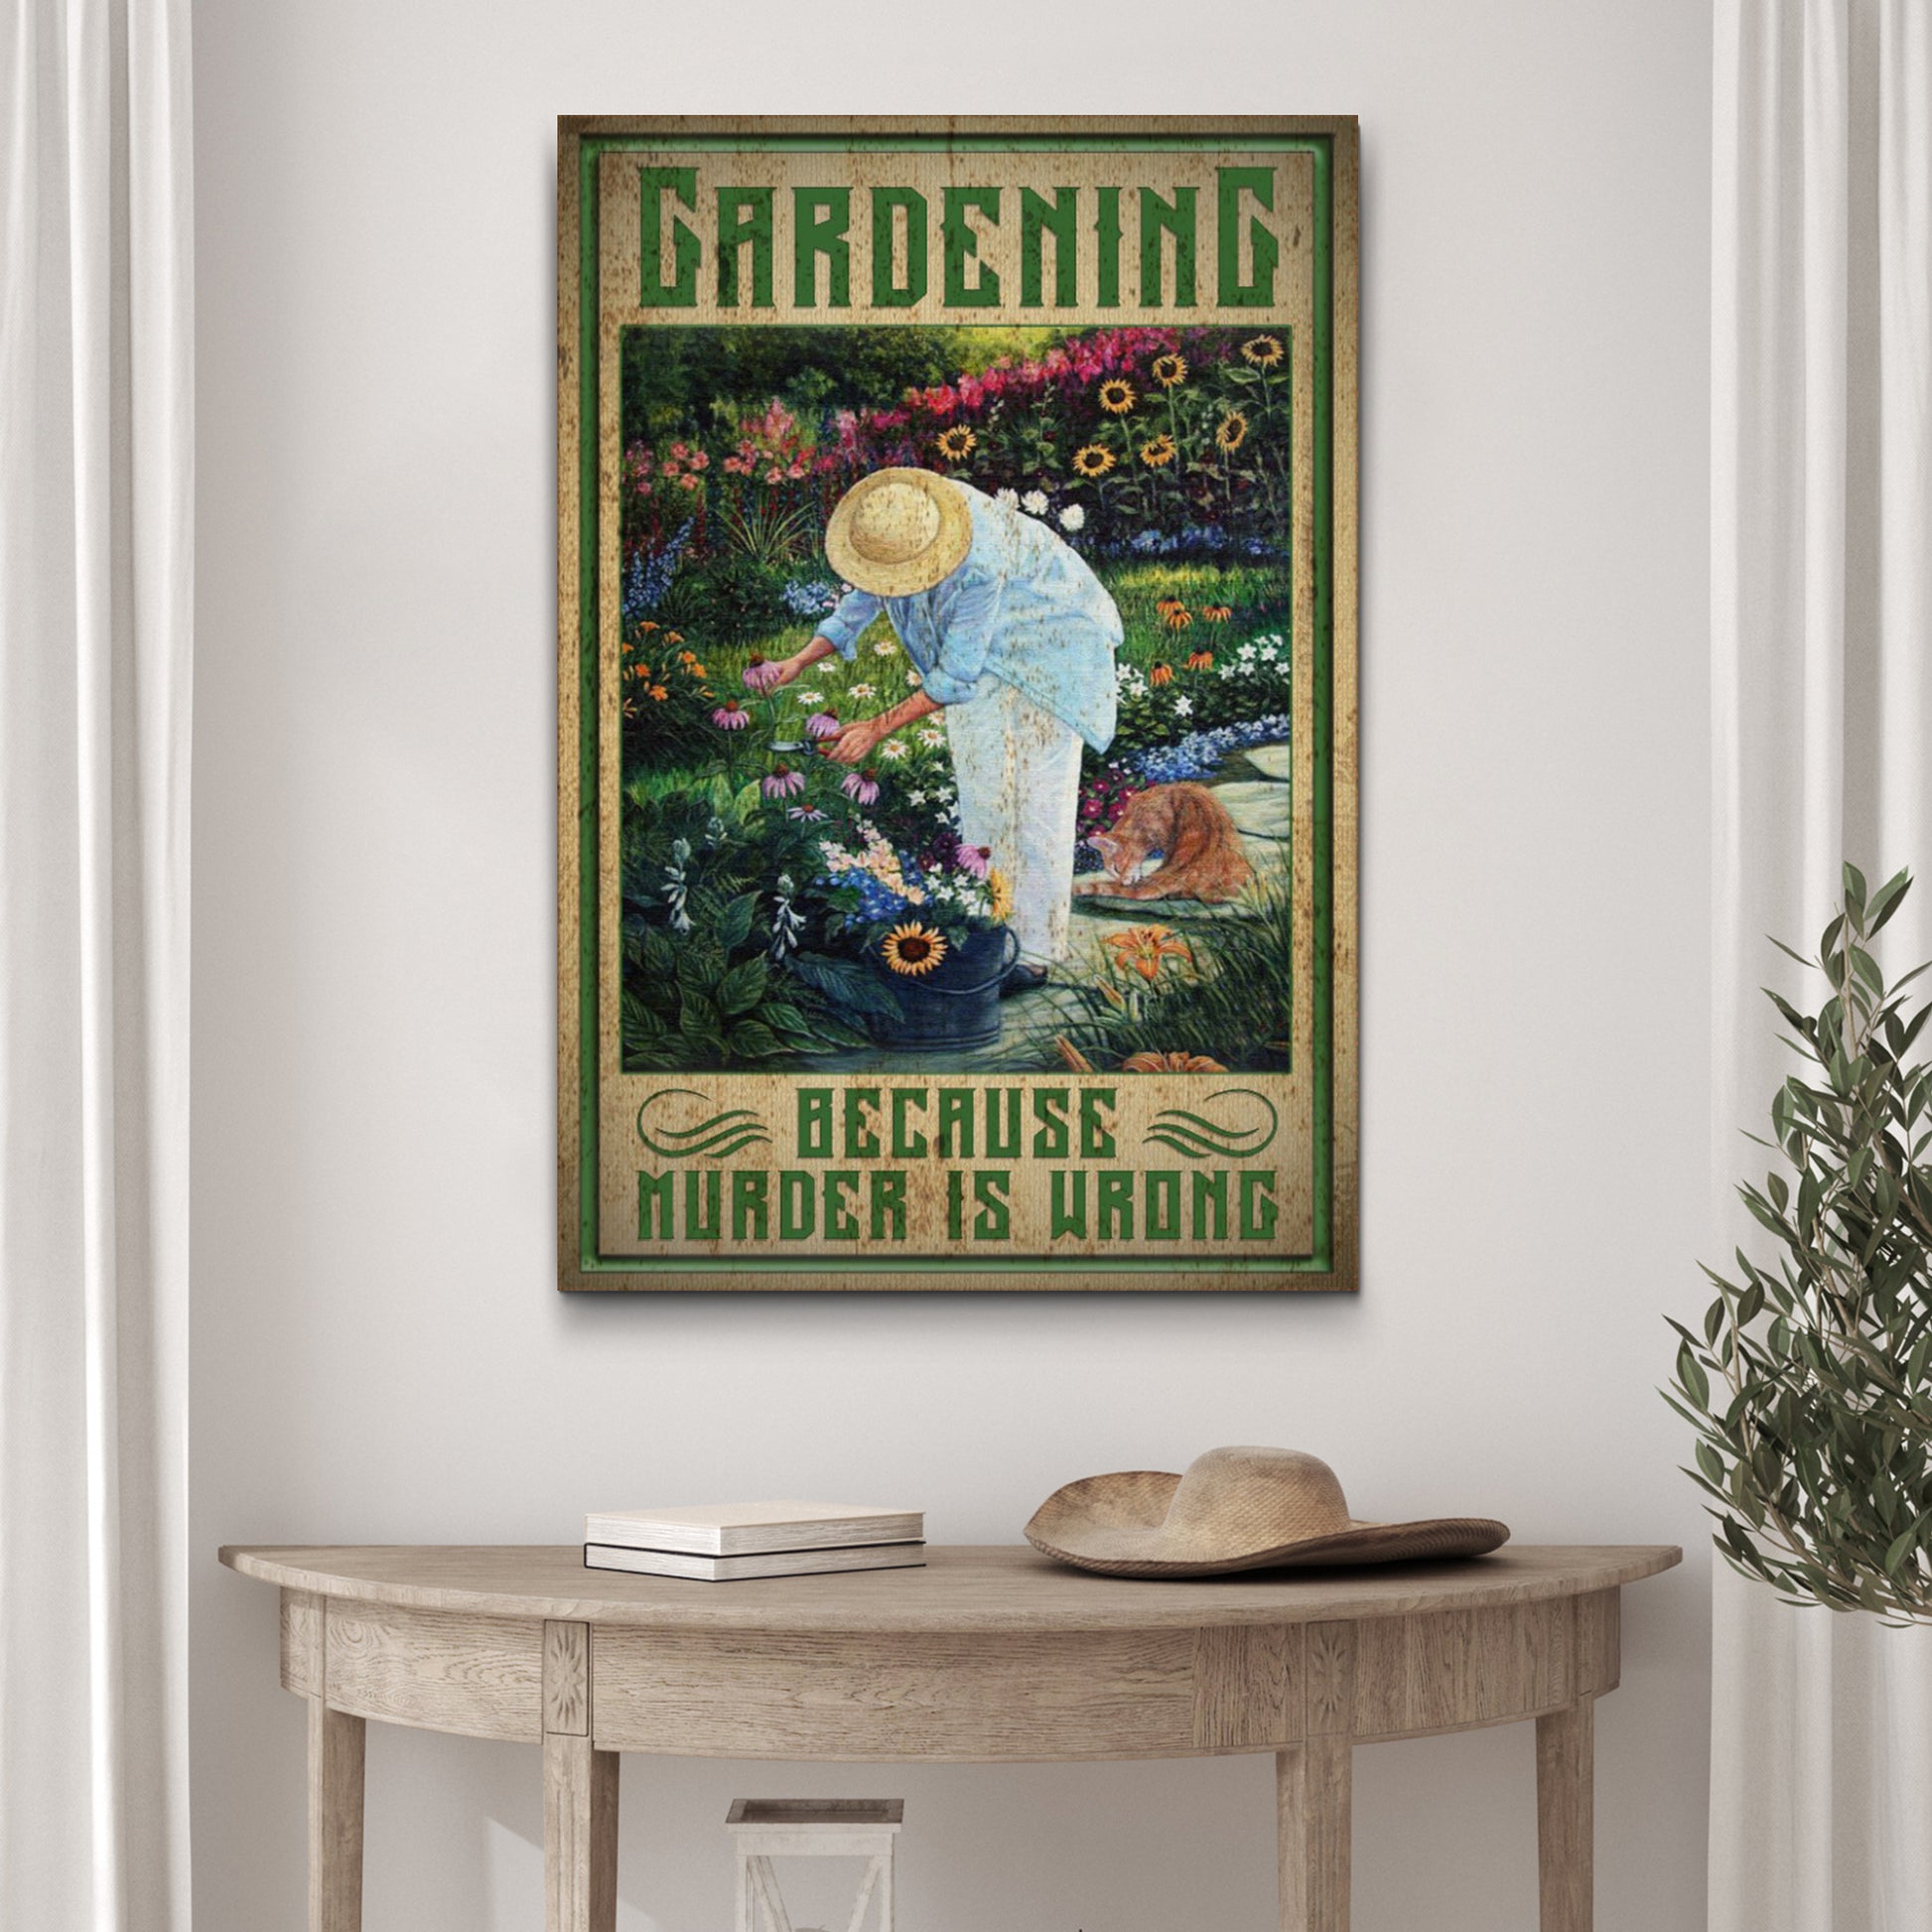 Gardening Because Murder Is Wrong Sign - Image by Tailored Canvases